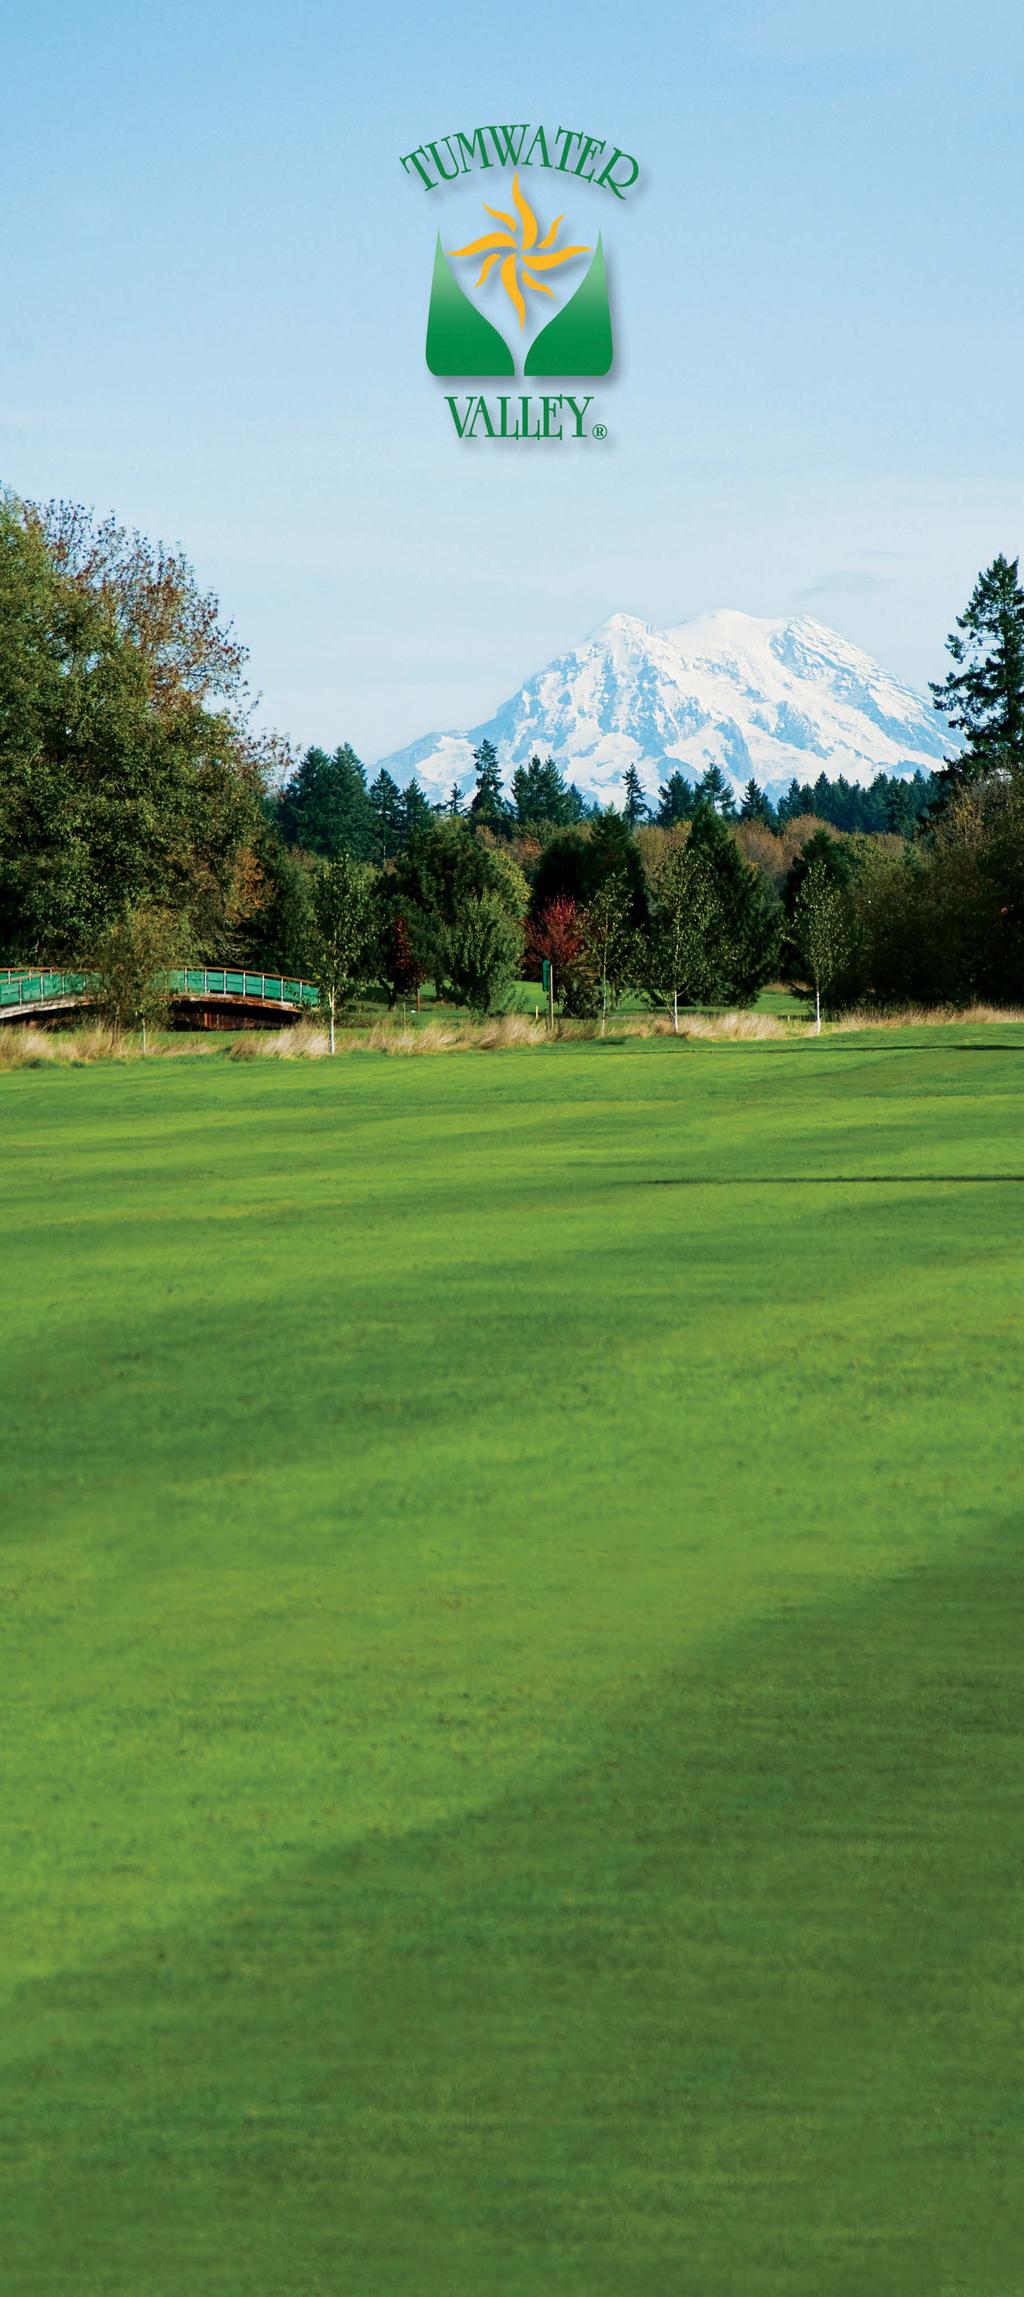 Tumwater Valley Golf Course 4611